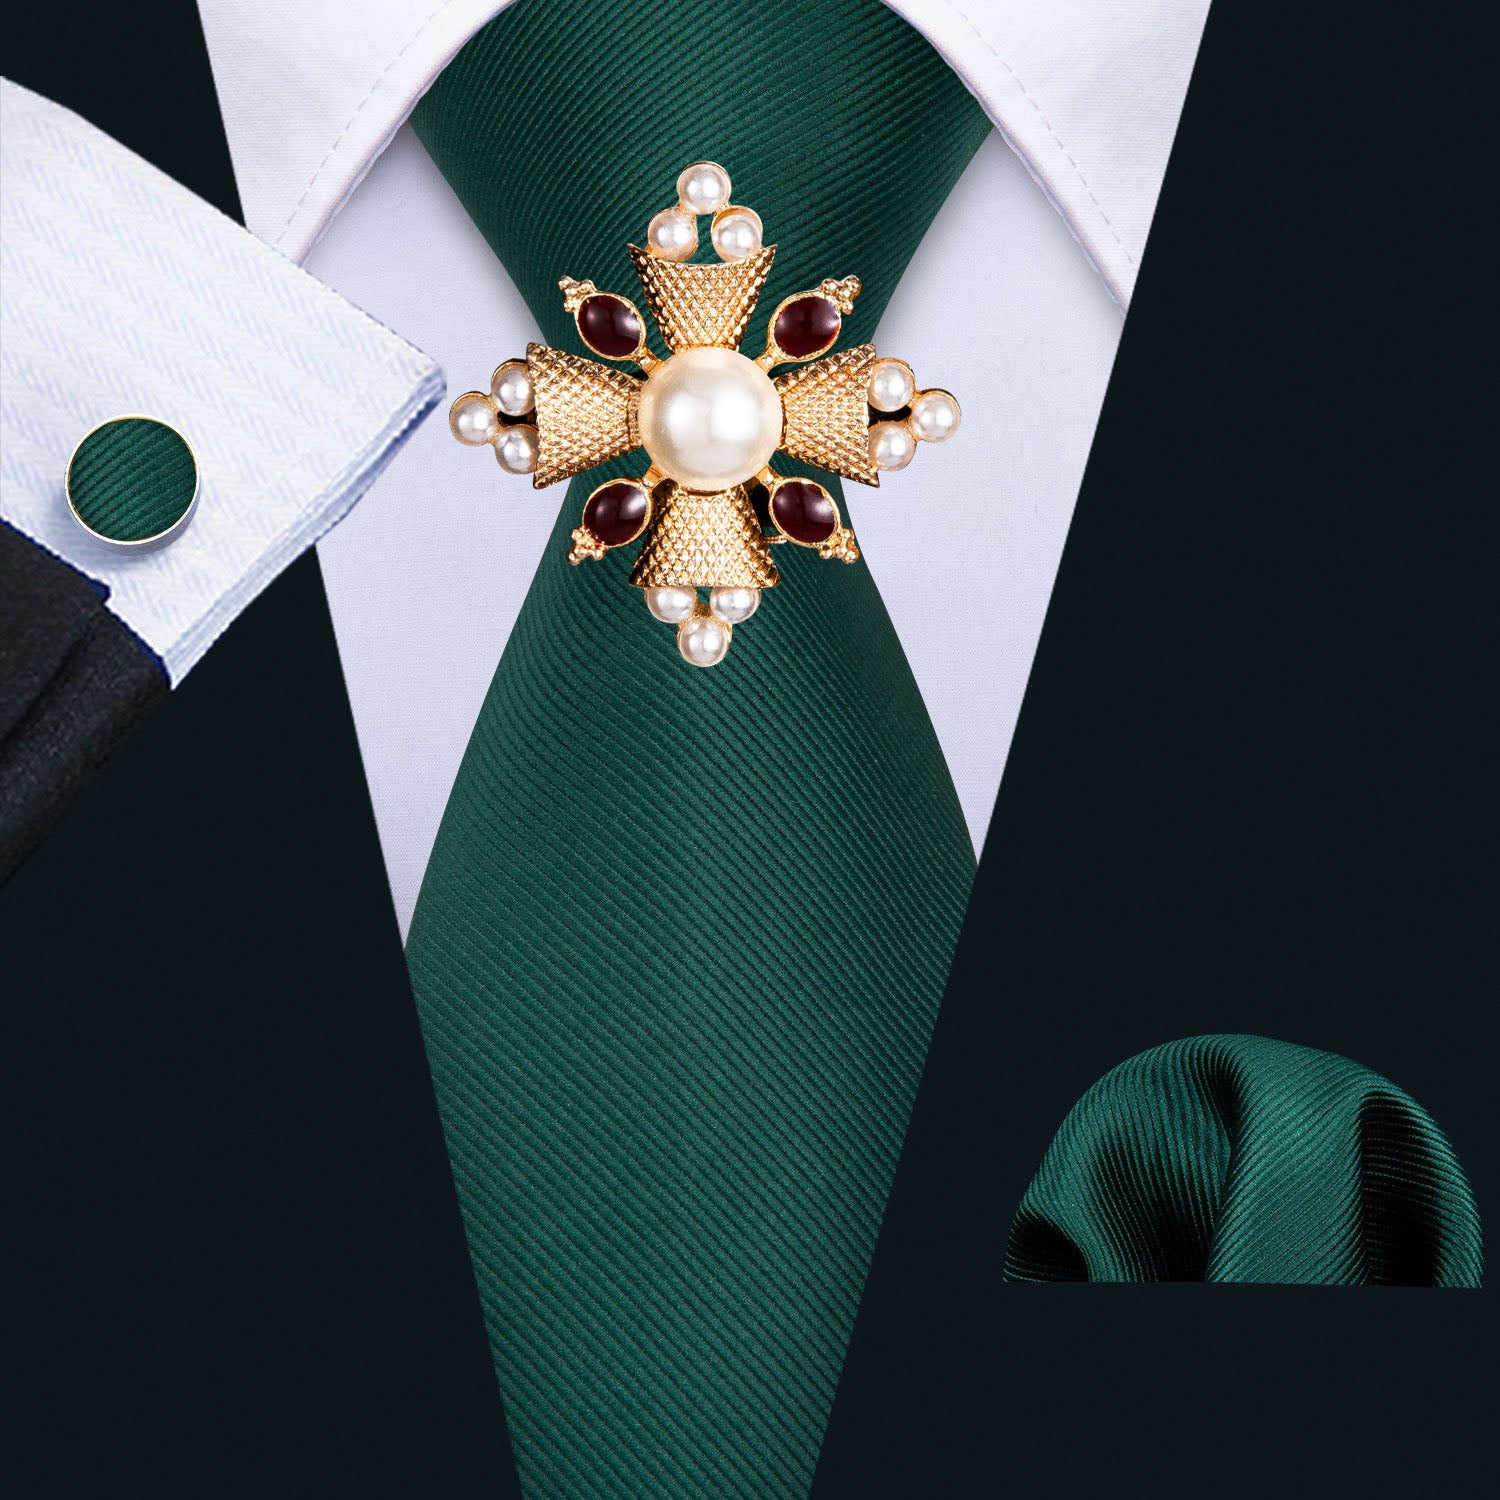 Formal Green Solid Tie Pocket Square Cufflinks Set 8.5cm Fashion Designer Neckties with Brooches Easy Matching